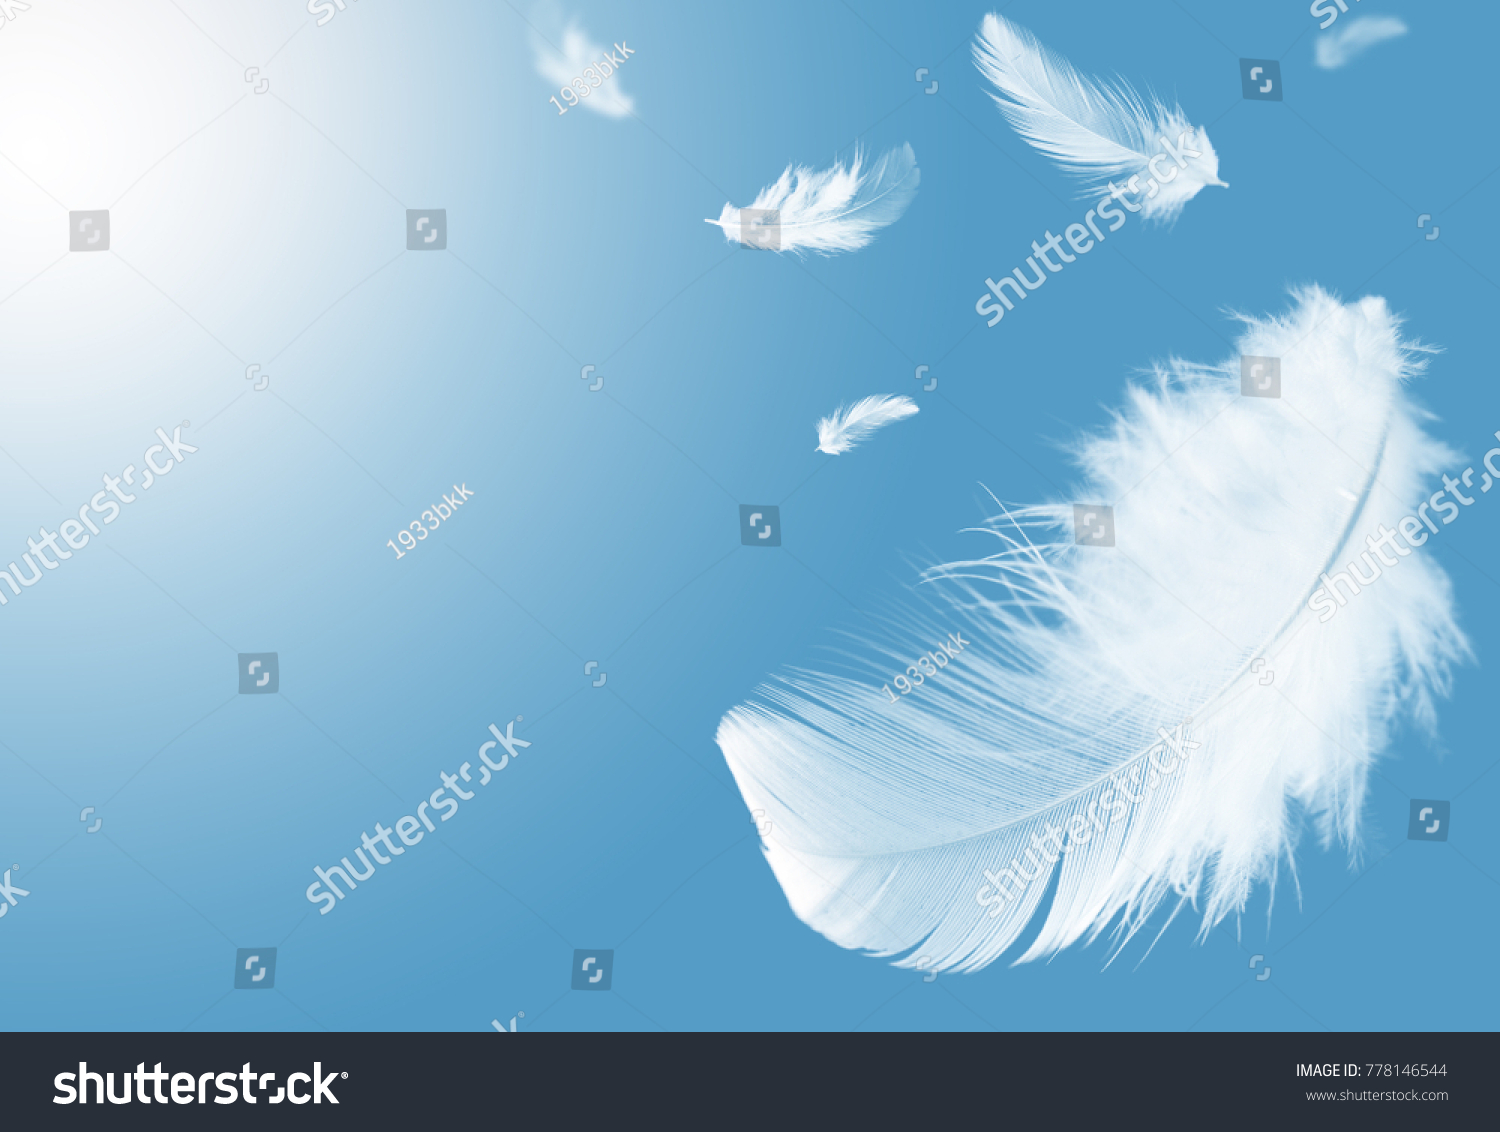 Light fluffy a white feathers floating in the sky with copy space. Feather abstract. Freedom concept background. #778146544